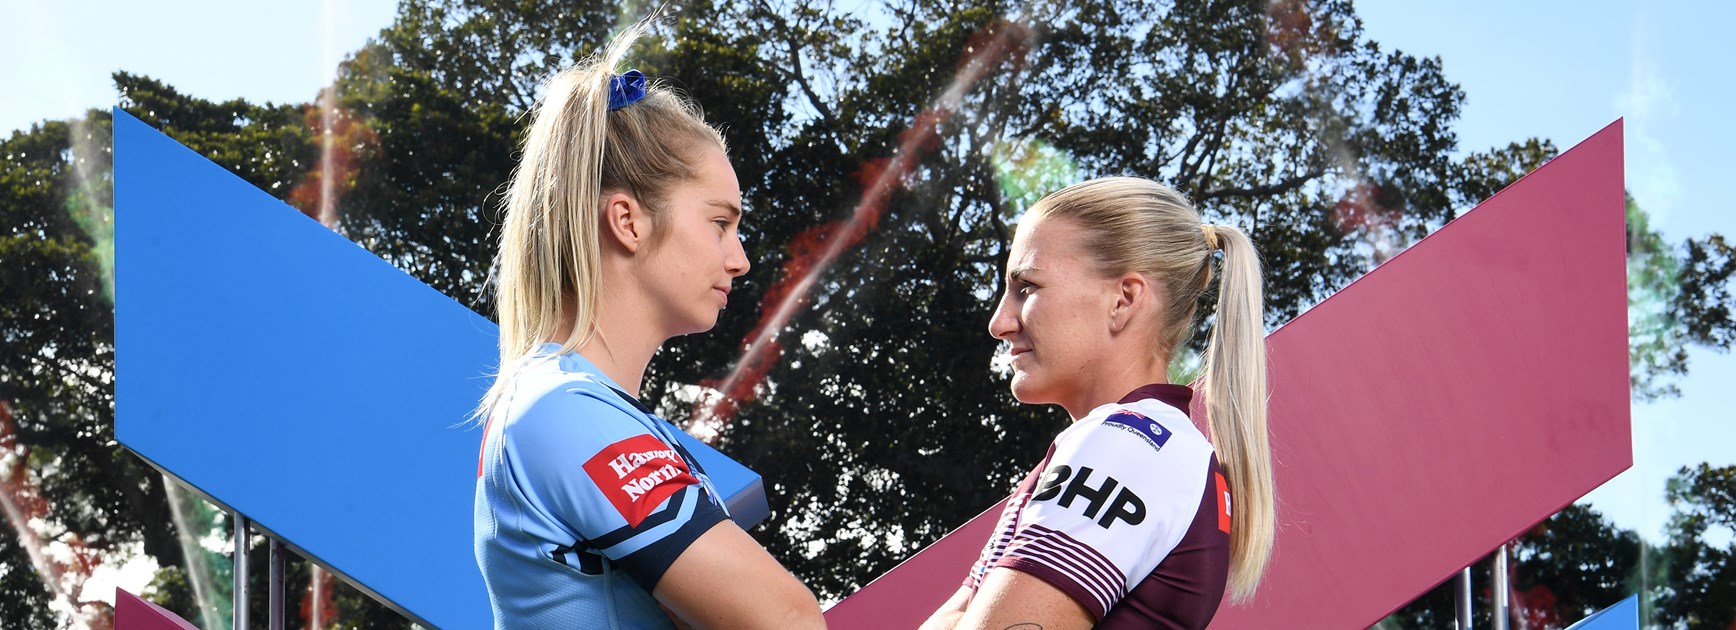 NSW Women's skill level to rise for 2019 State of Origin